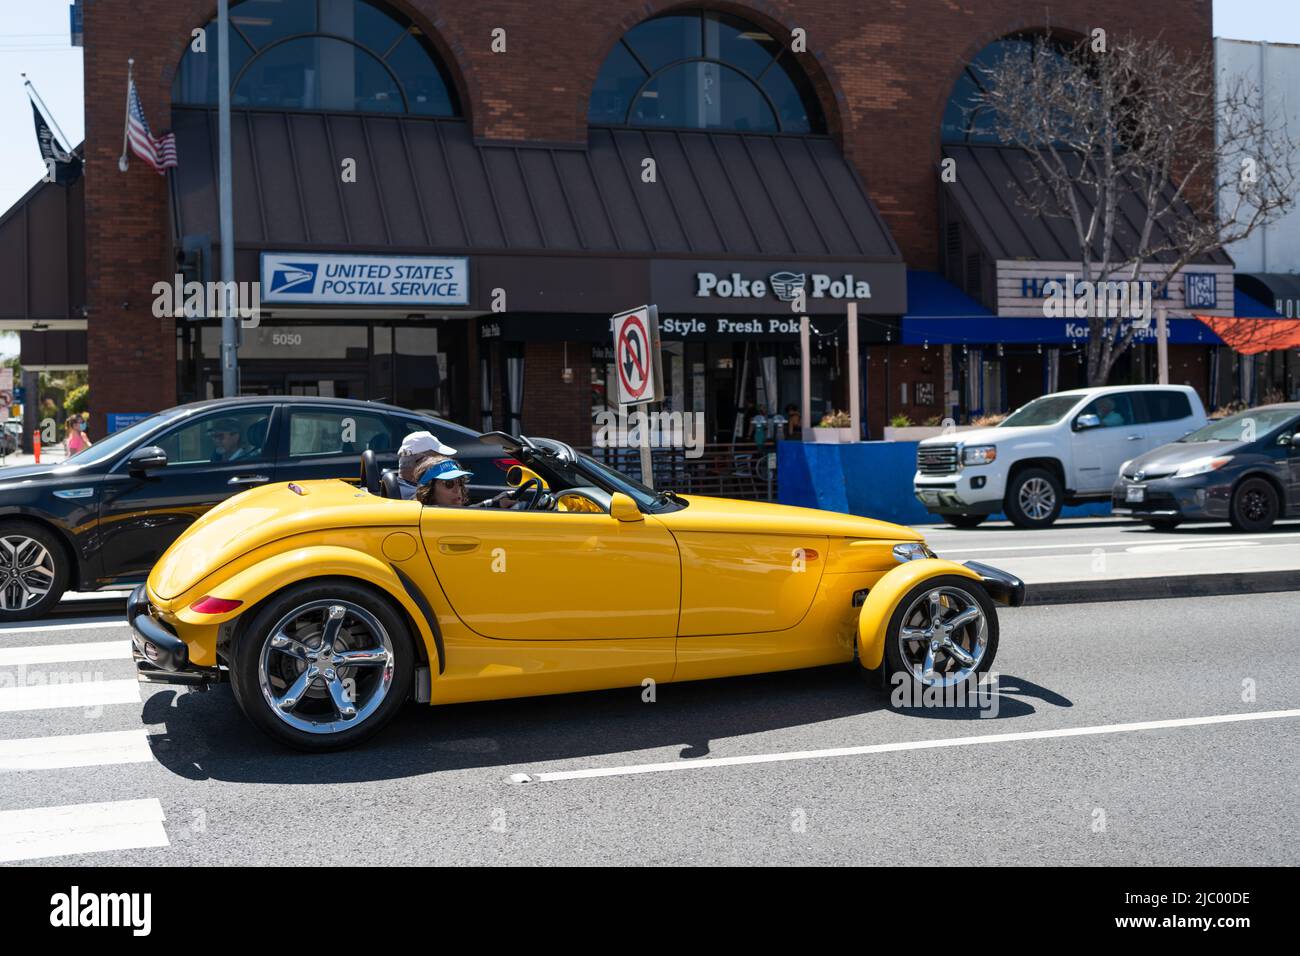 Long Beach, California USA - March 31, 2021: classic vehicle of yellow Chrysler Plymouth Prowler Stock Photo